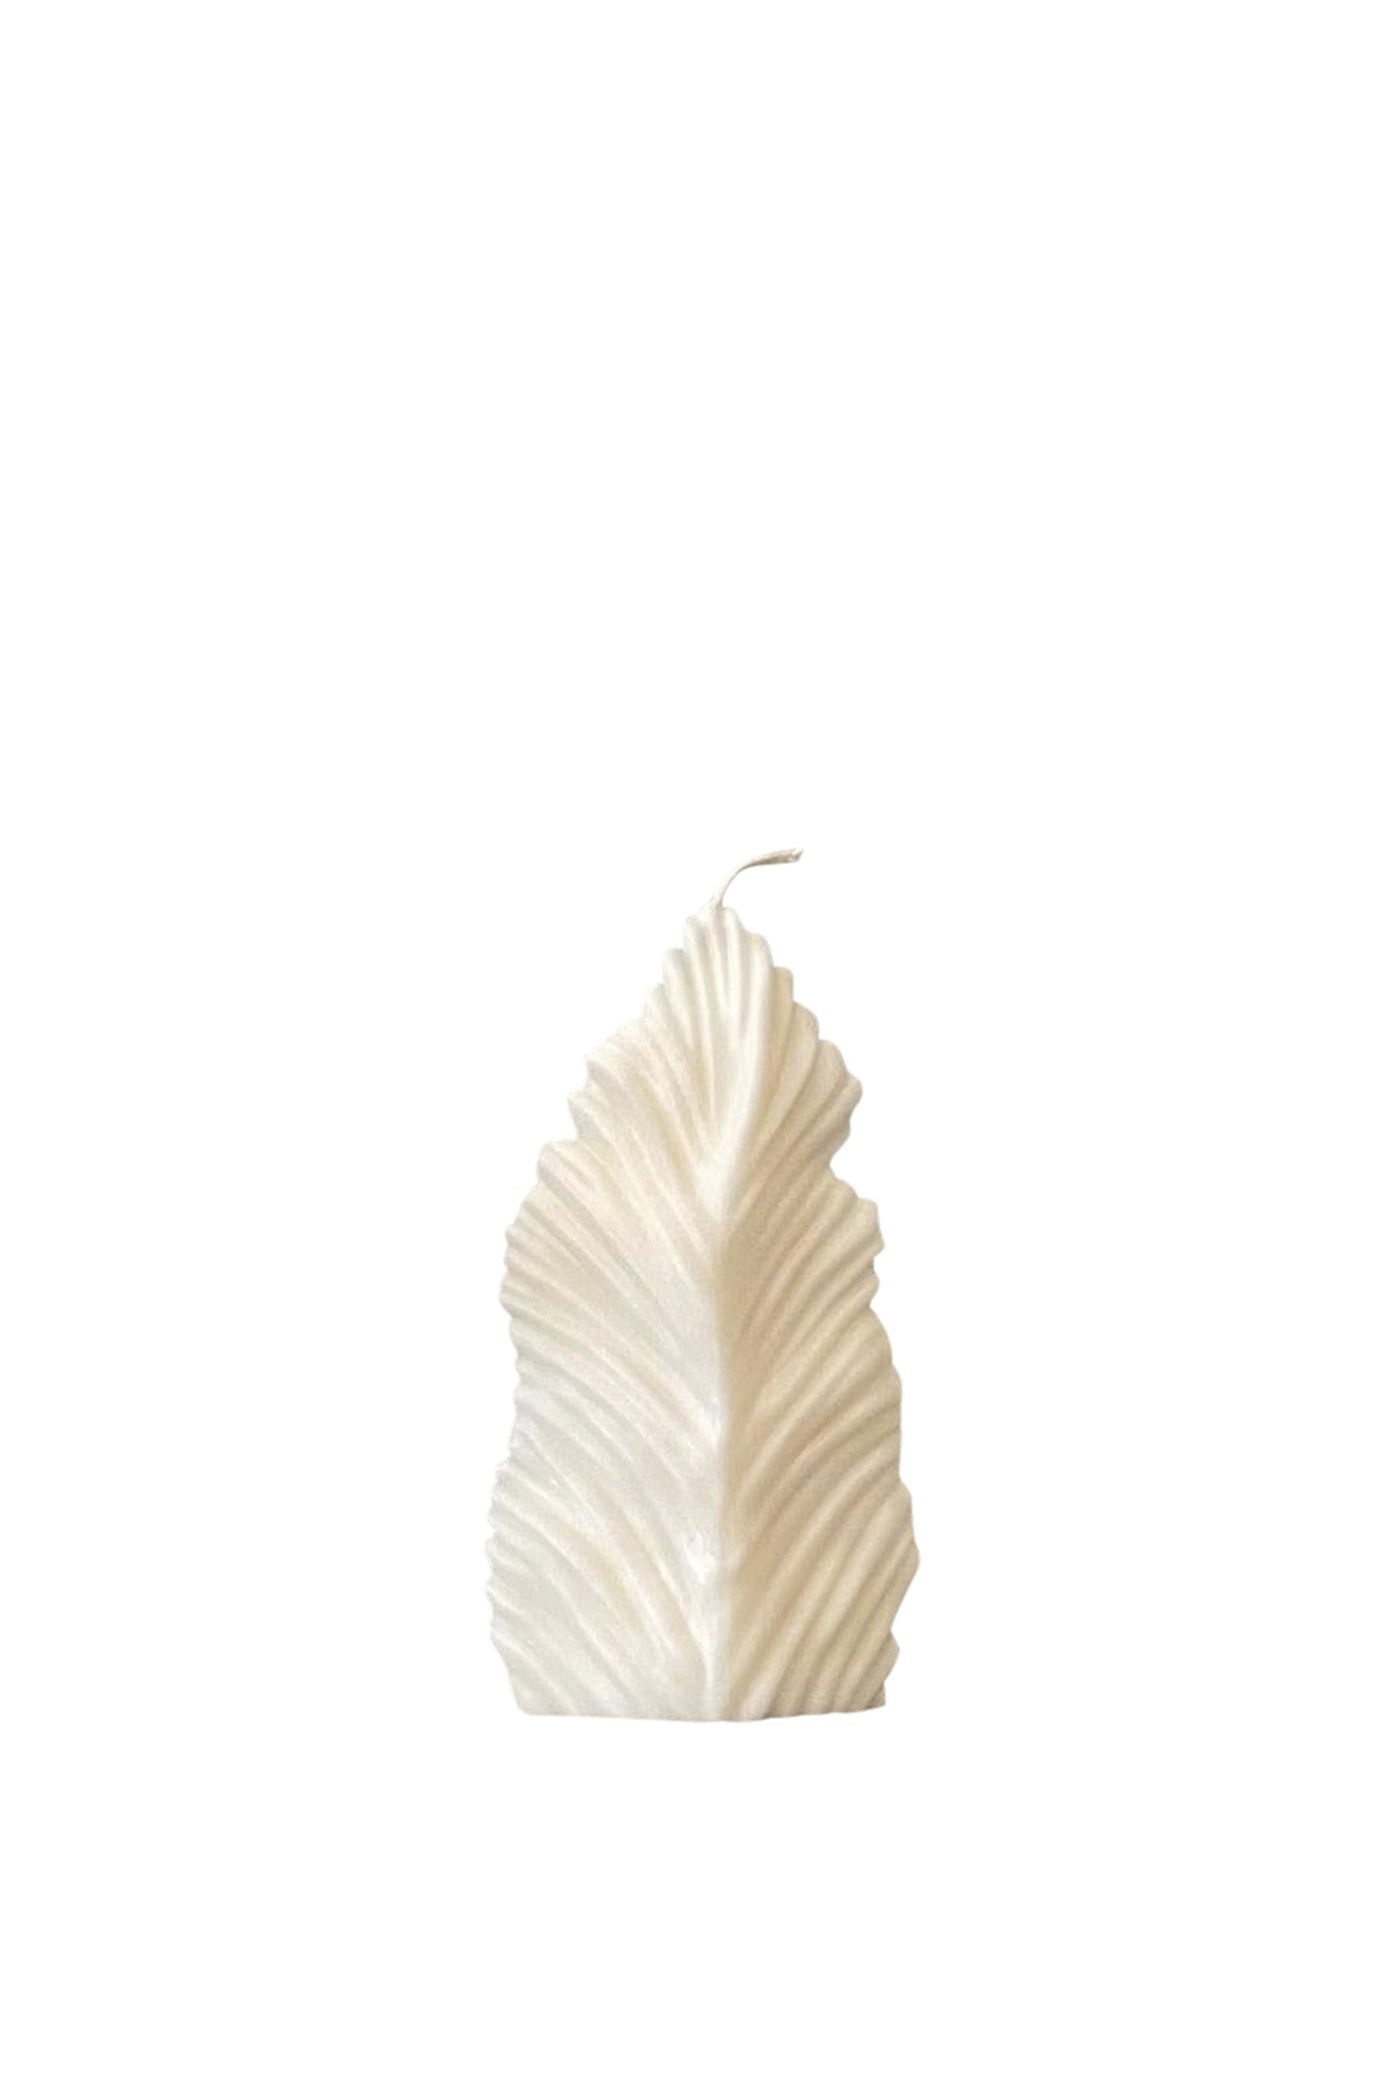 Husk Quill Candle - Ivory